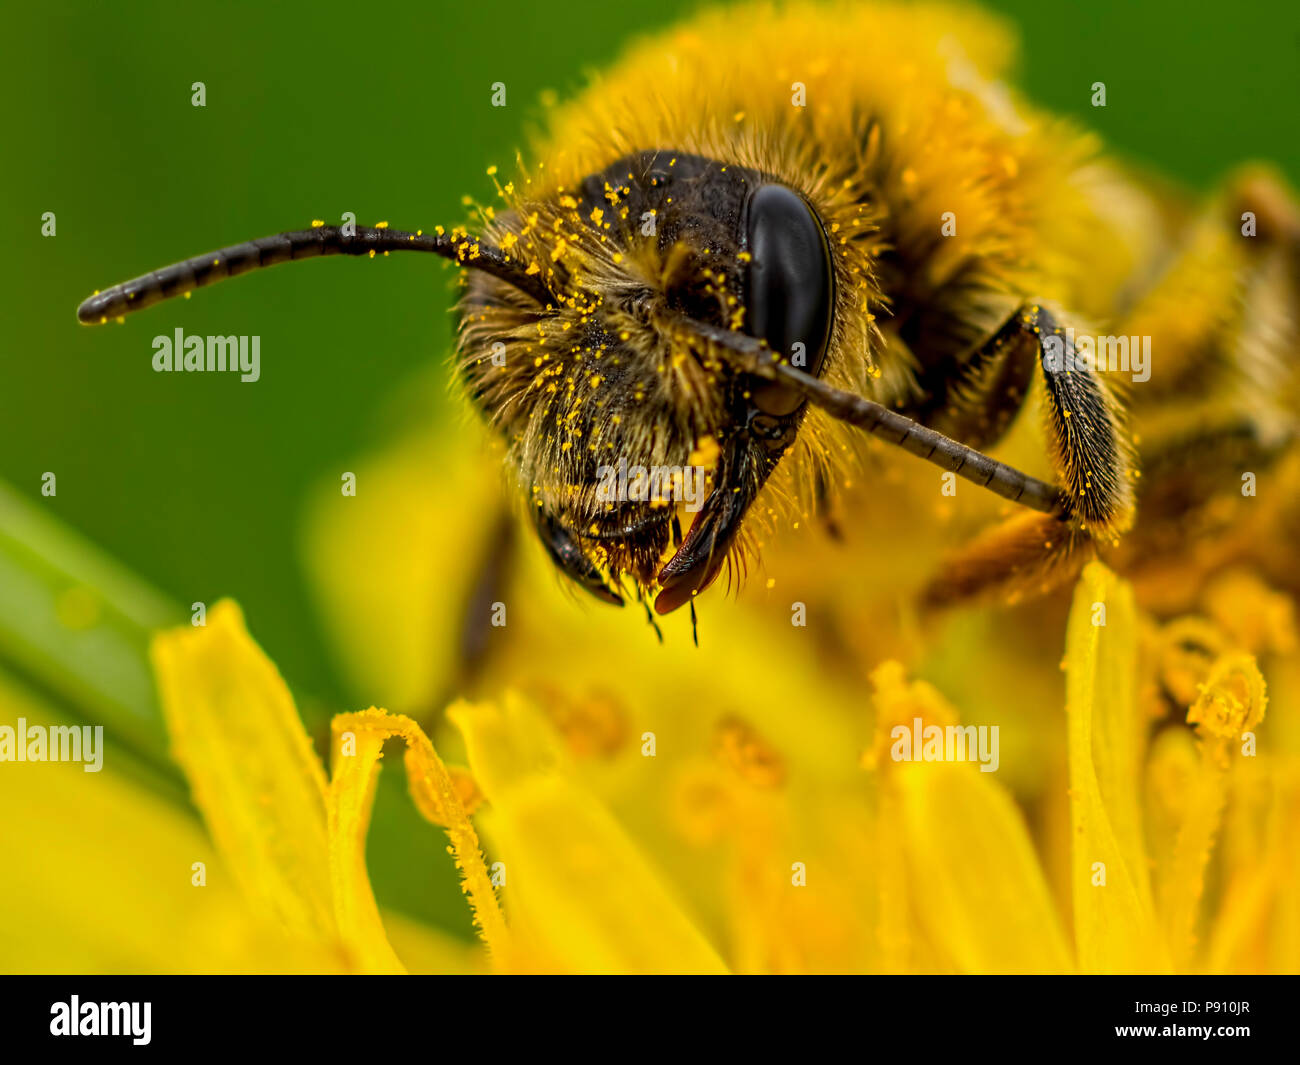 Solitary Bee showing its jaws Stock Photo